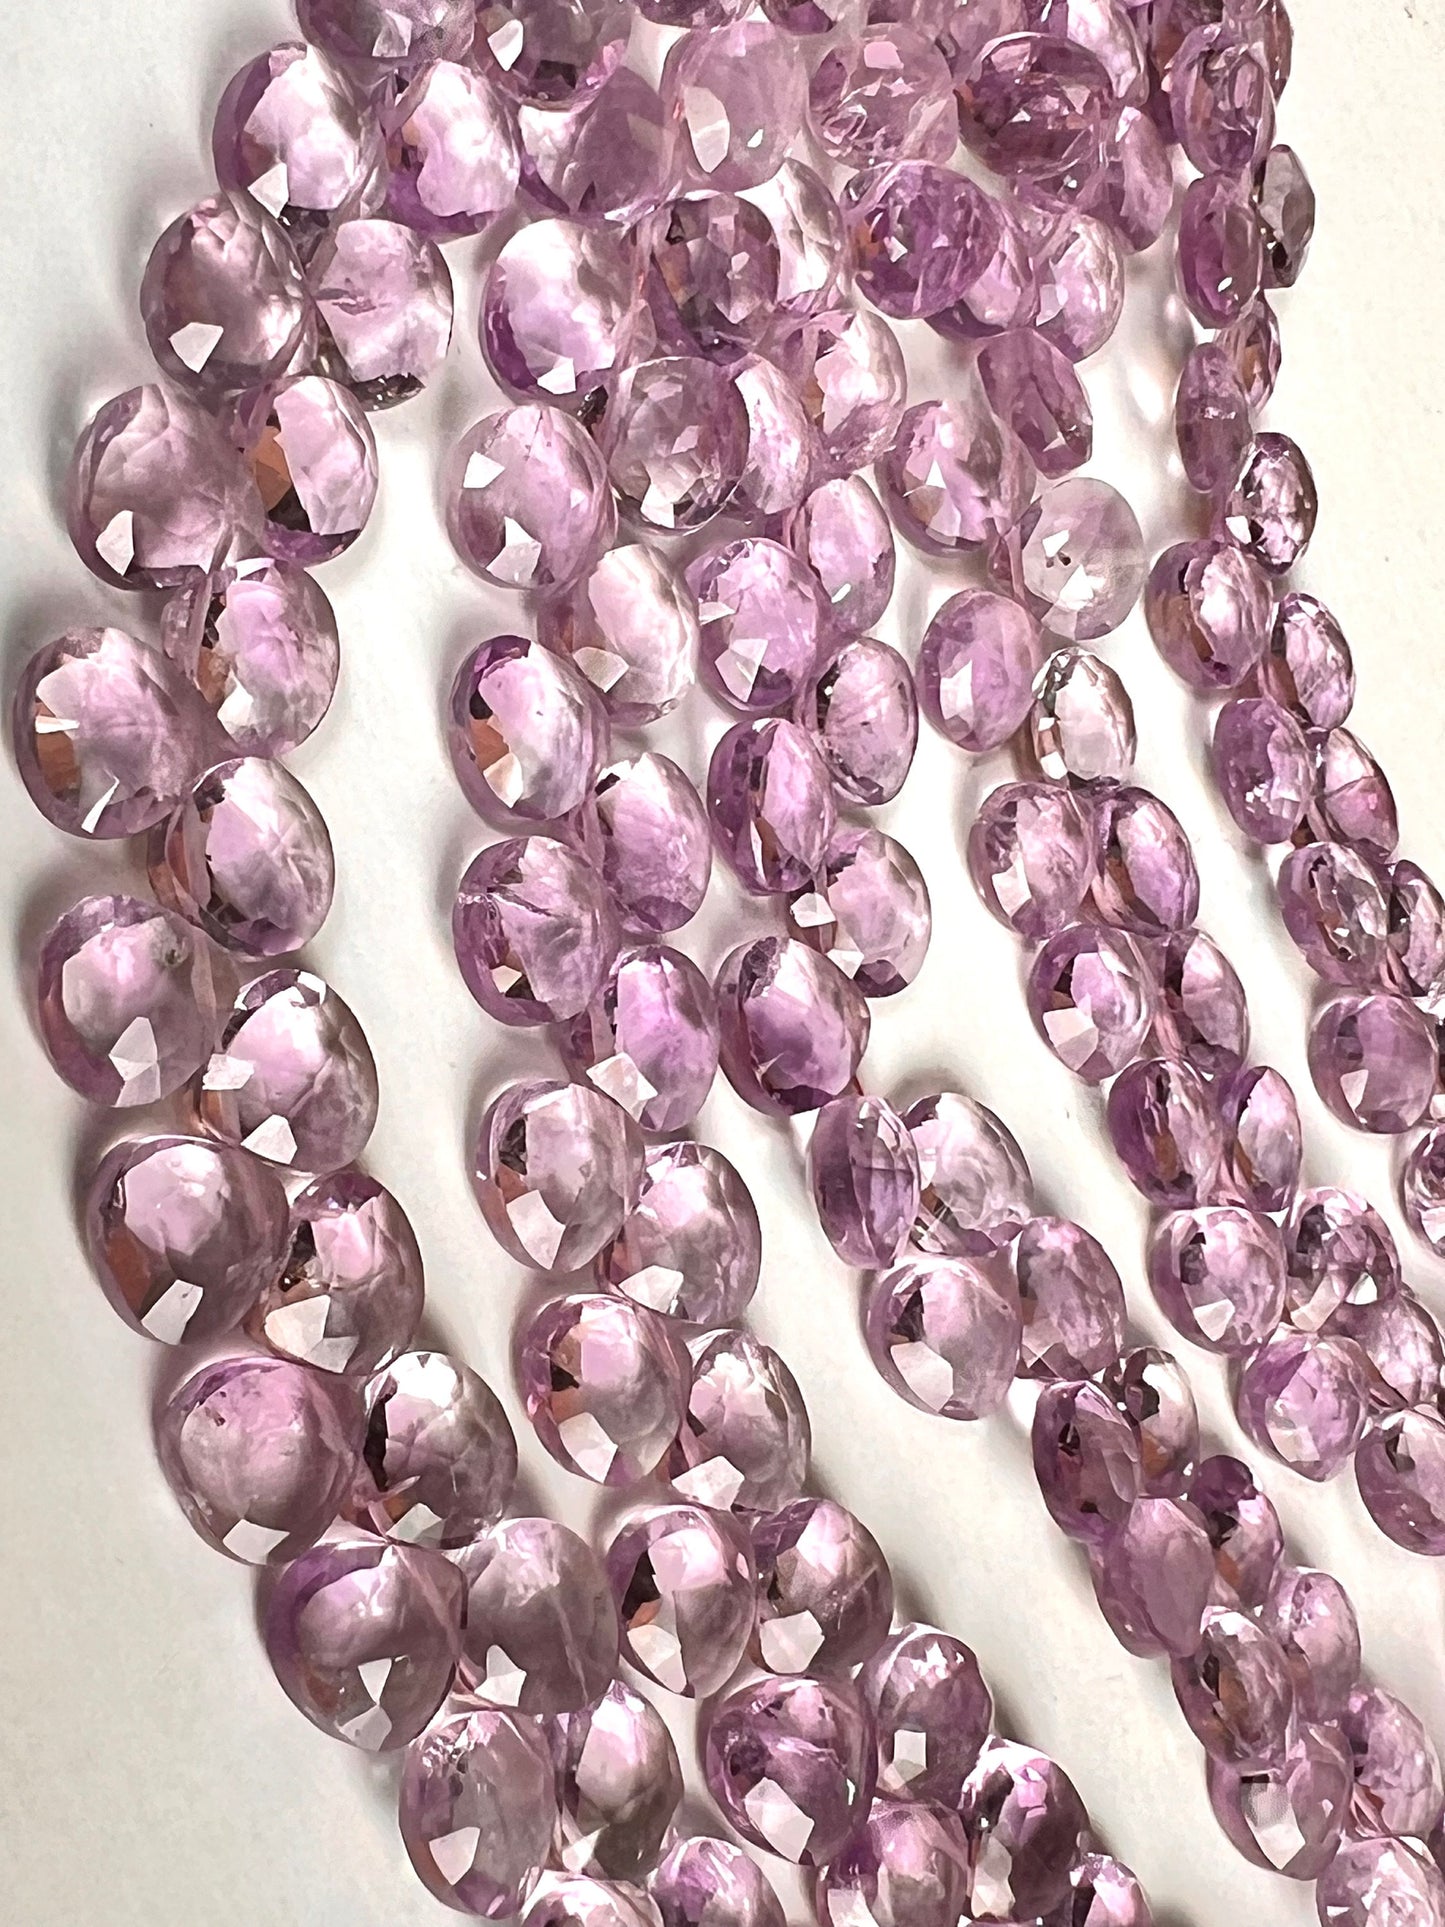 Natural Pink Amethyst Faceted heart drop 8.5-9mm icy lavender pink for Jewelry Making Gemstone Beads . 10, 20, 30 pcs